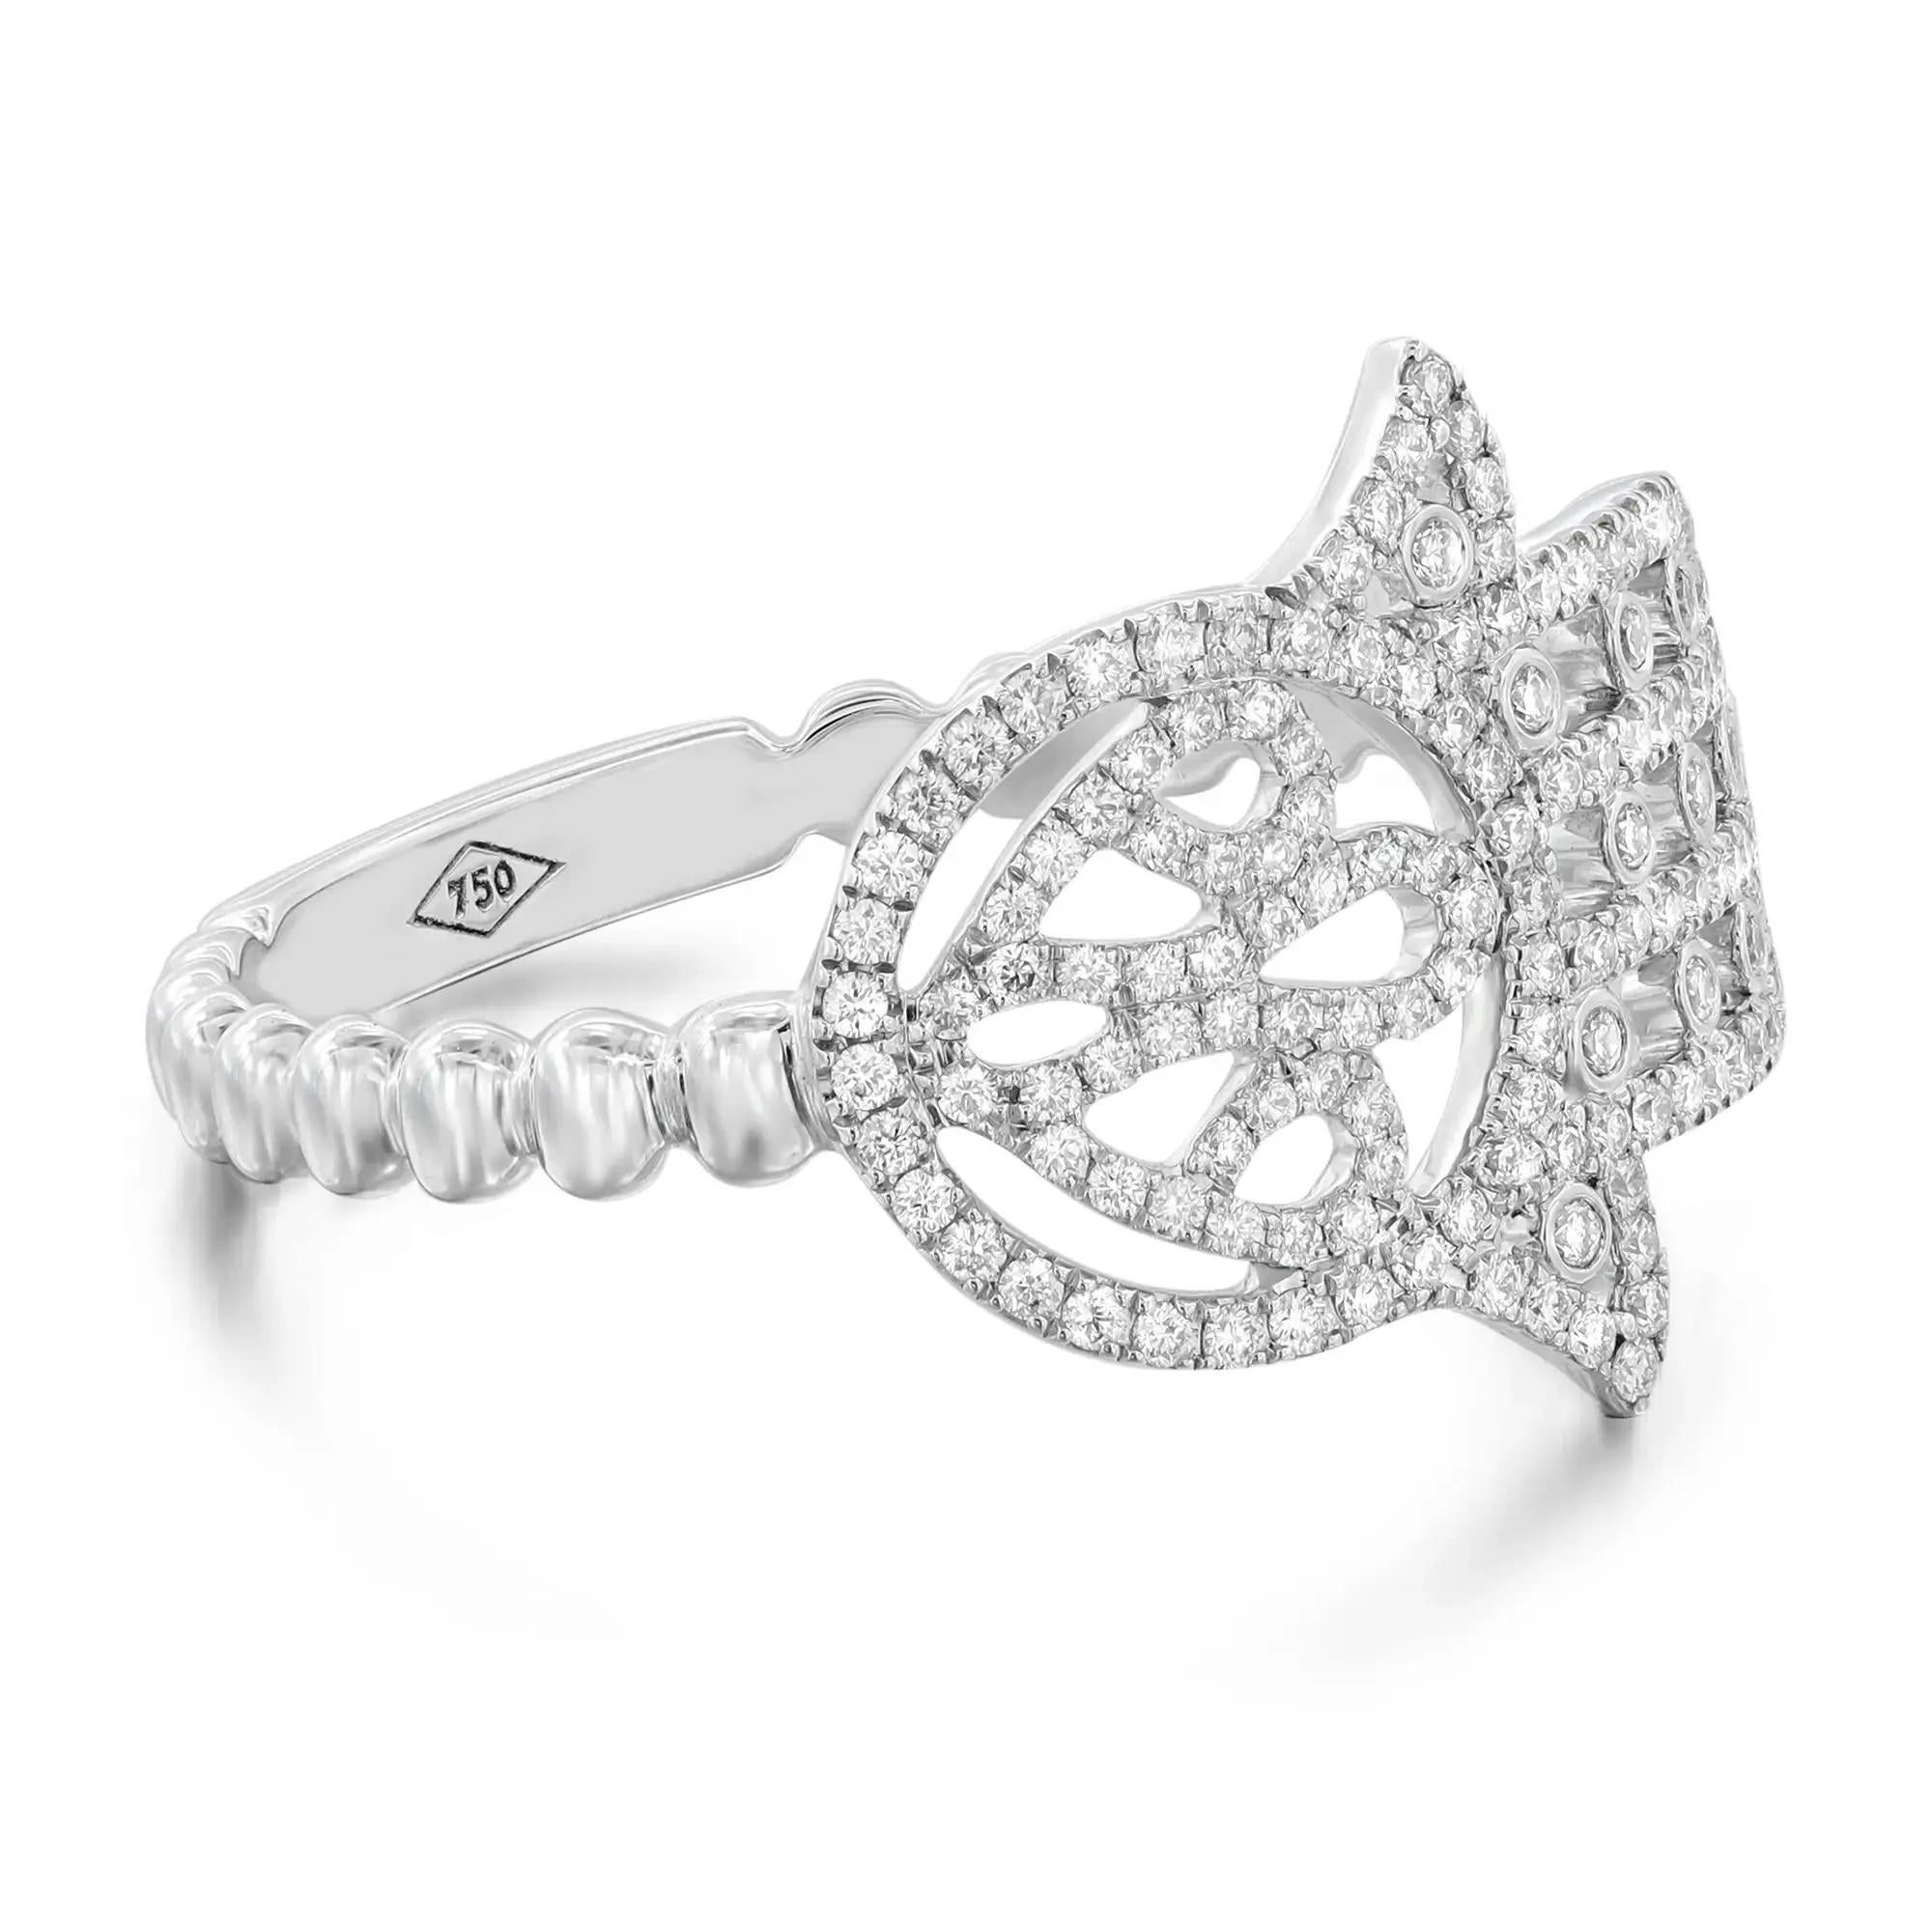 This unique Messika Faith diamond band ring features a Hamsa sign studded with pave set round brilliant cut diamonds weighing 0.25 carat, designed to protect and ward off negative energies. Diamond color G and clarity VS. Crafted in 18K white gold.